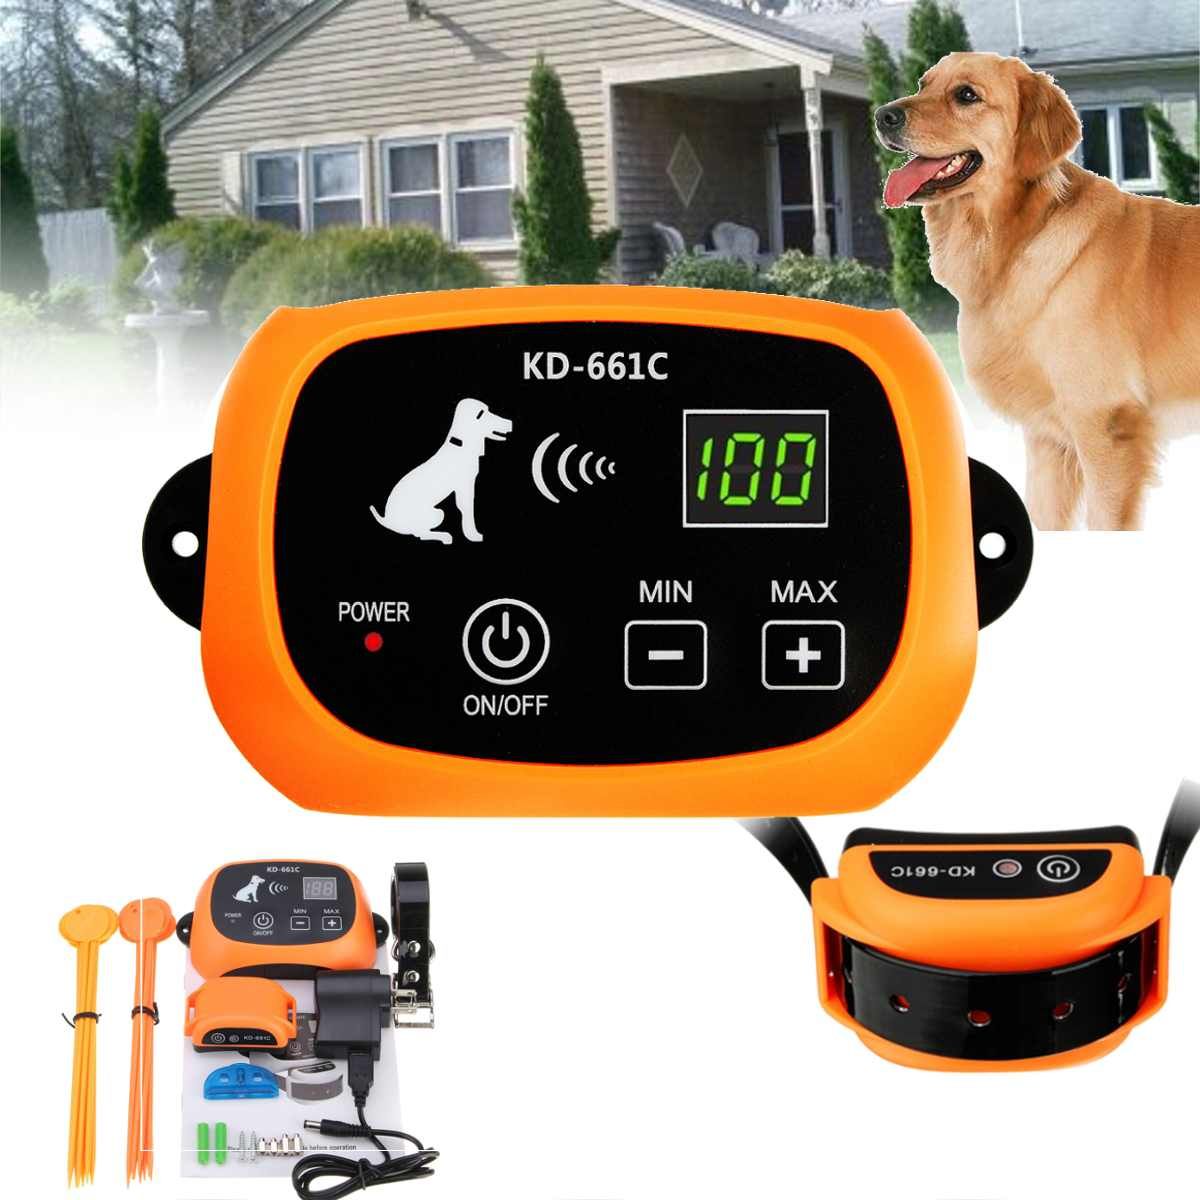 Wireless Electric Dog Fence - Invisible Dog Fence With Shock Collar, IP66 Waterproof/Rechargeable Collar